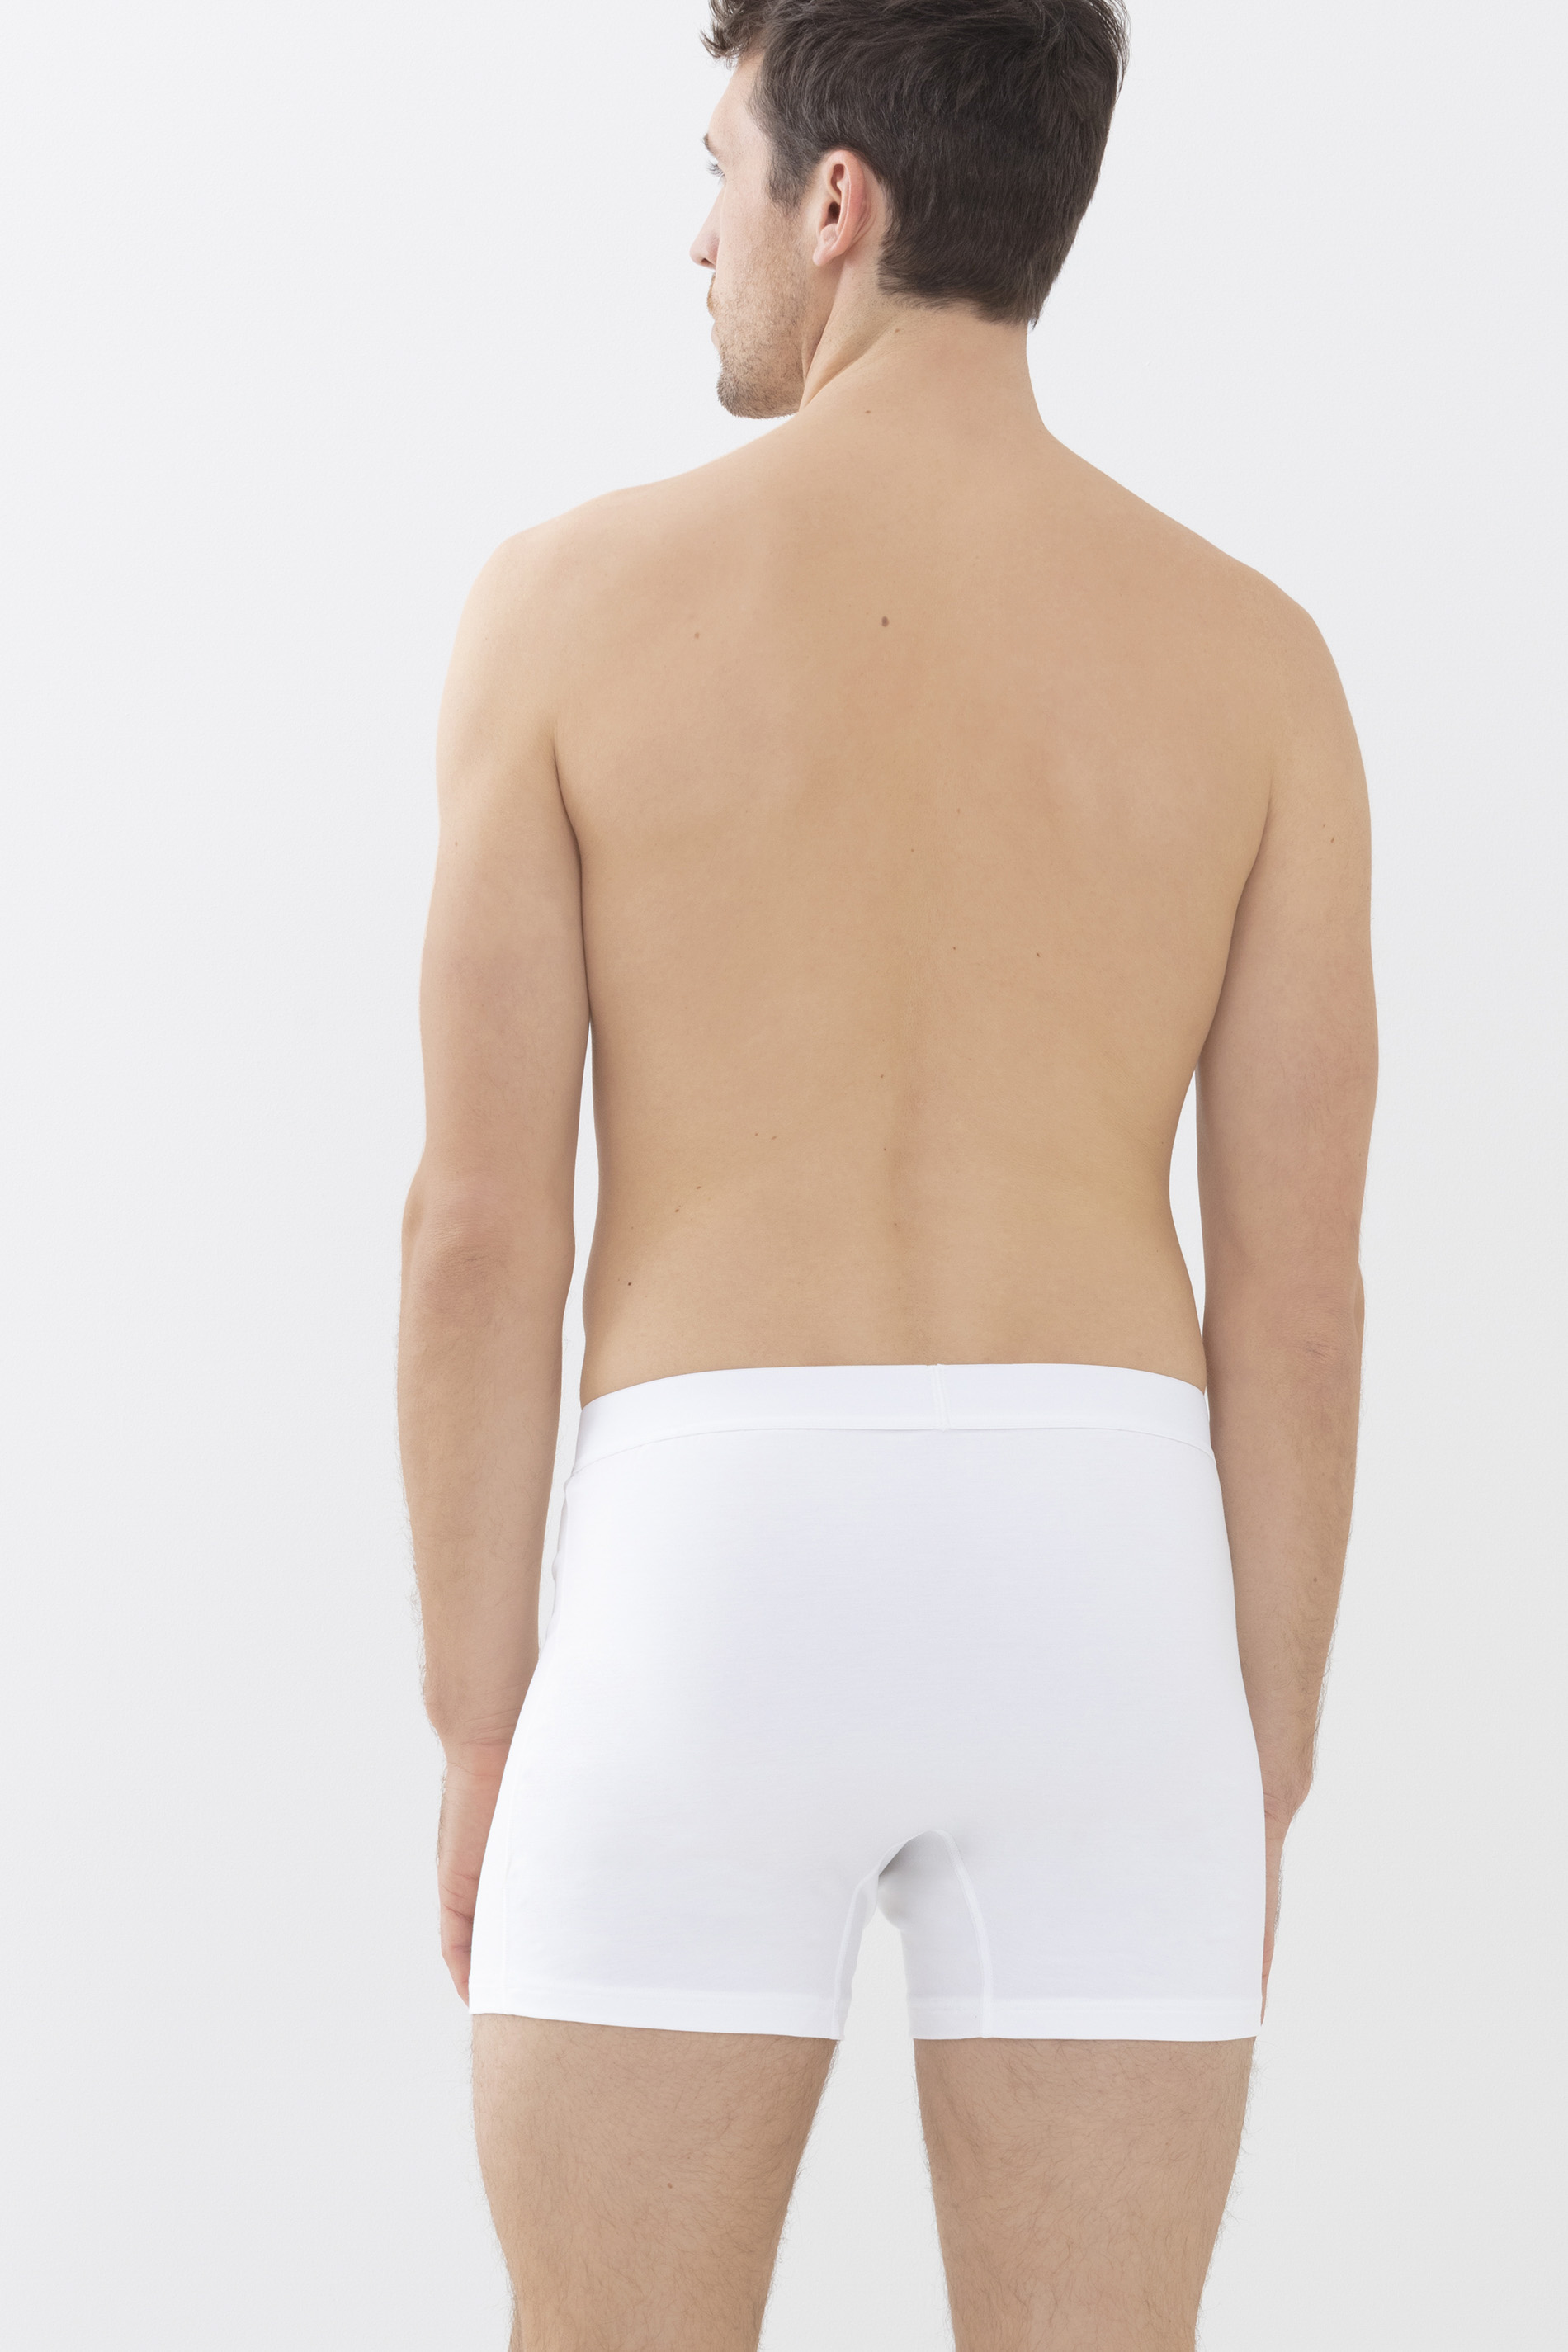 Trunk Shorts White Business Class Rear View | mey®